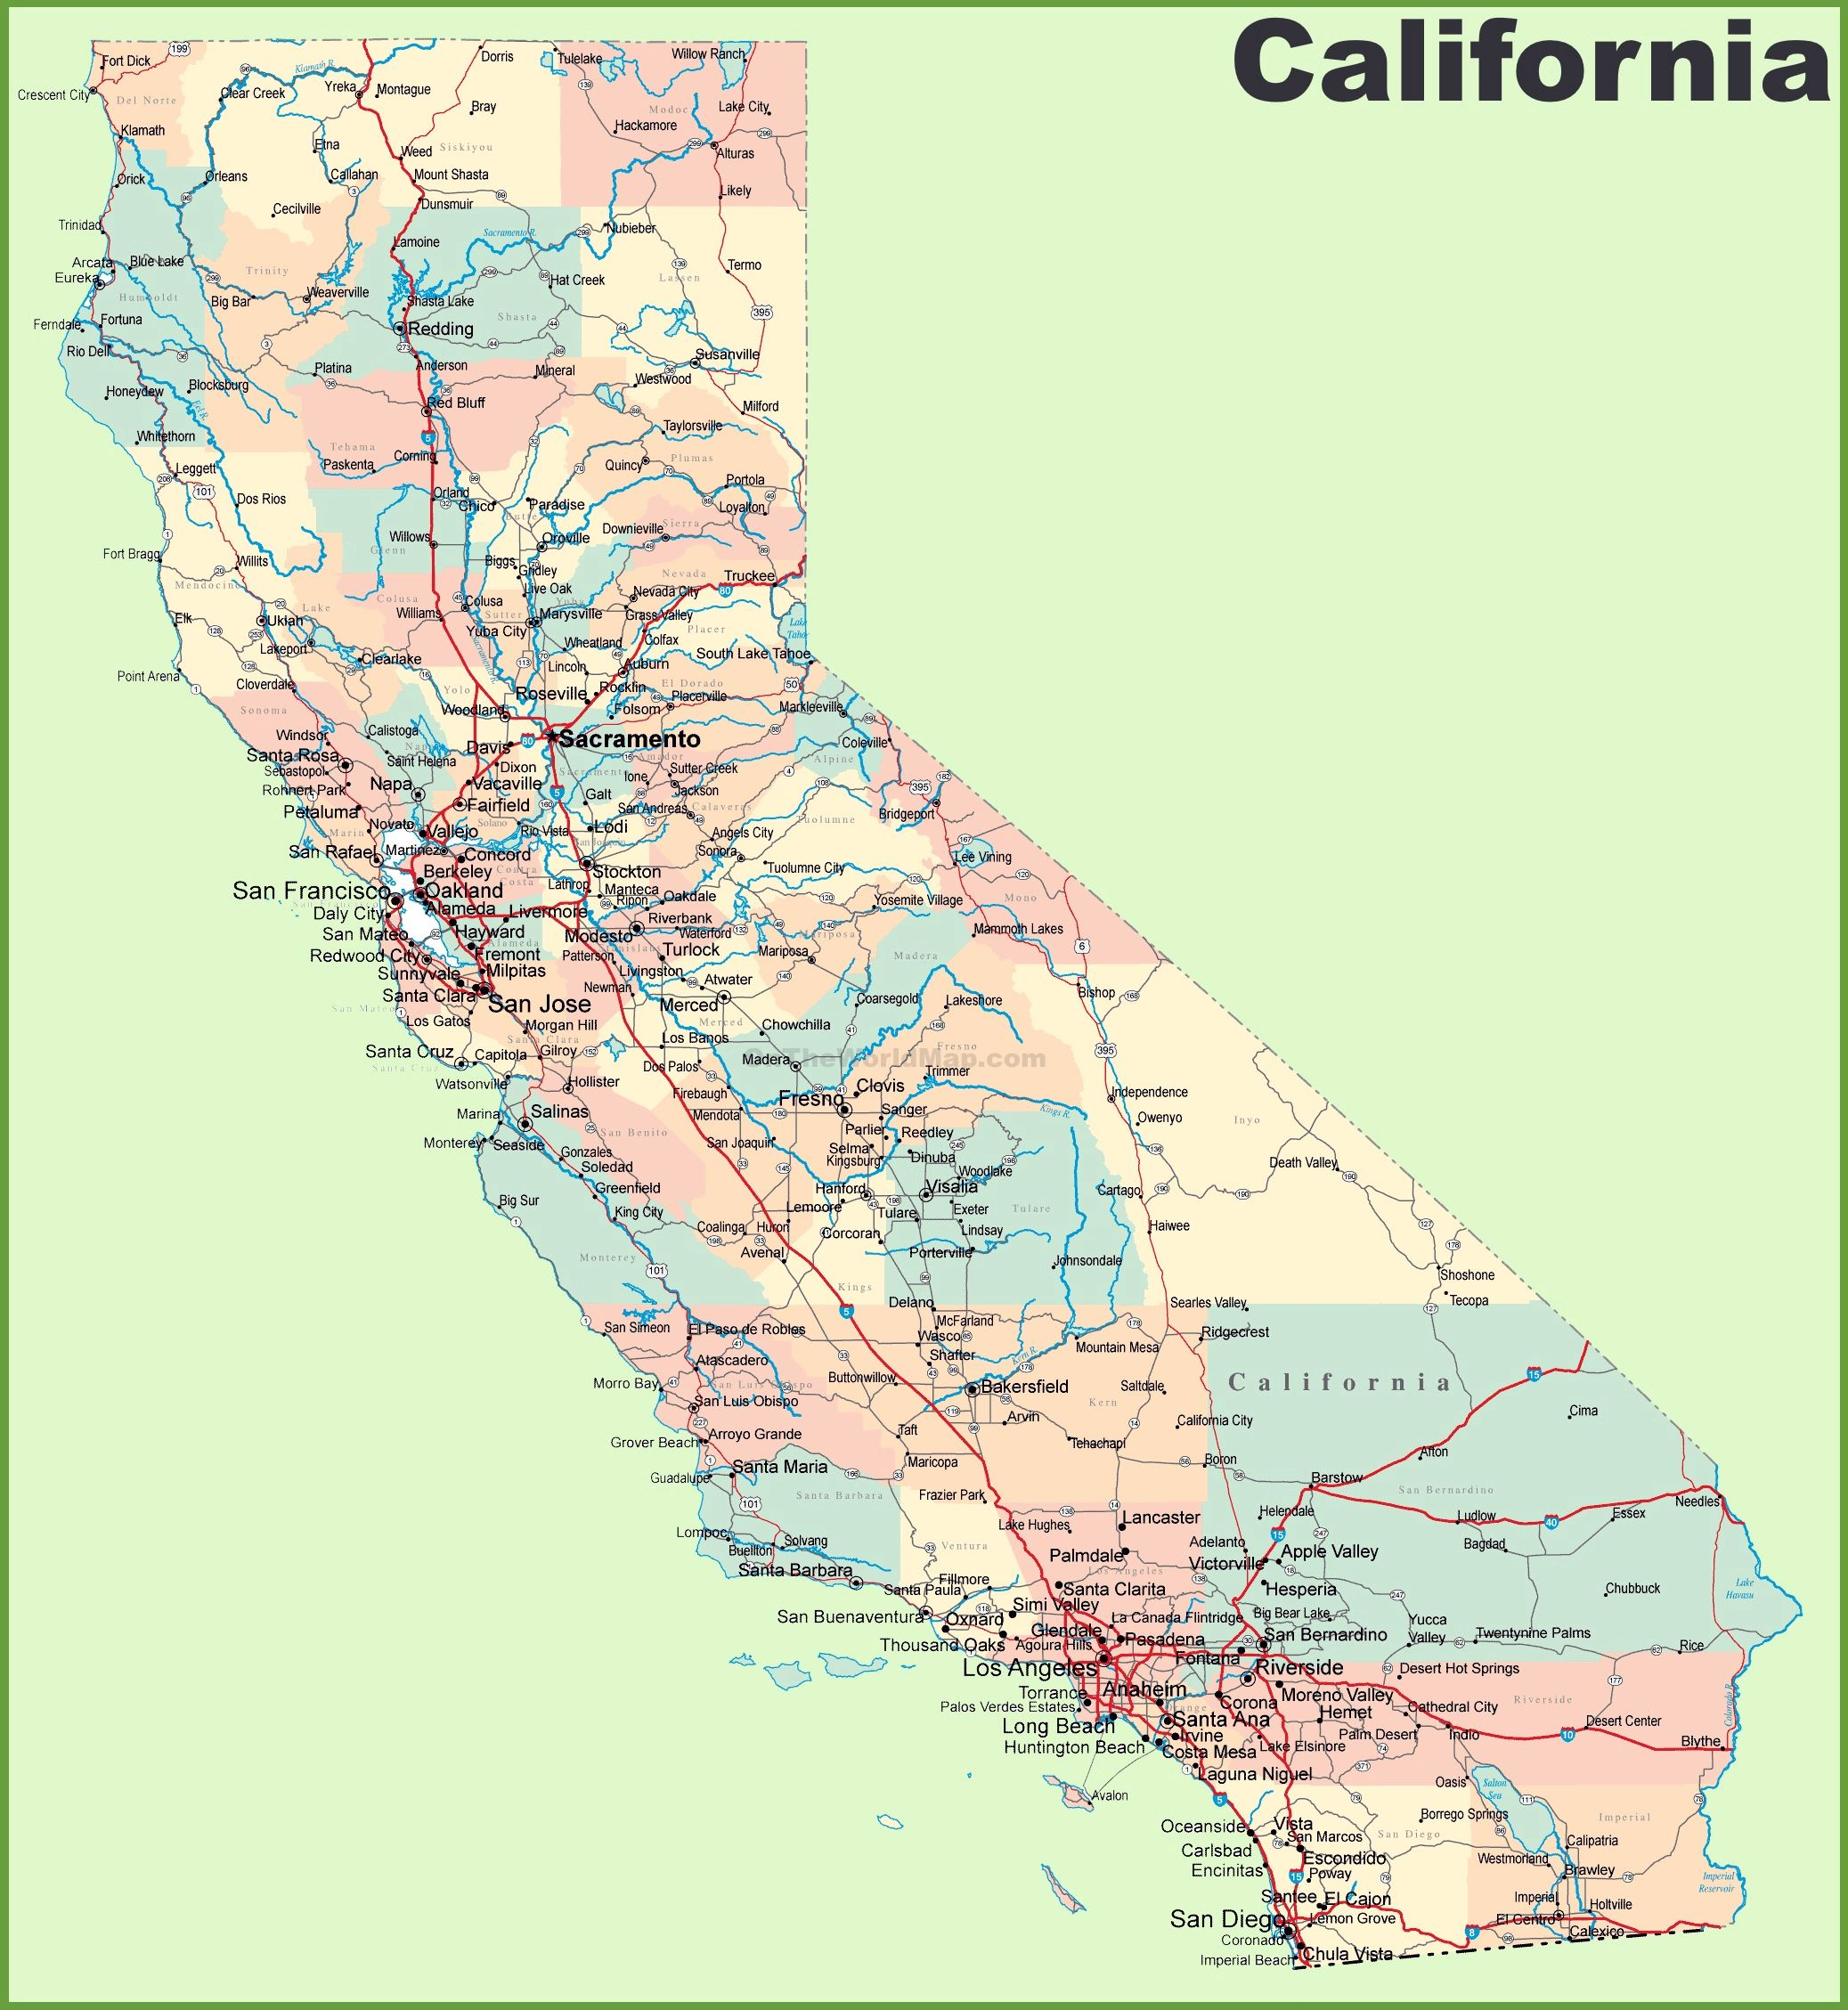 Large California Maps For Free Download And Print | High-Resolution - California Map With All Cities